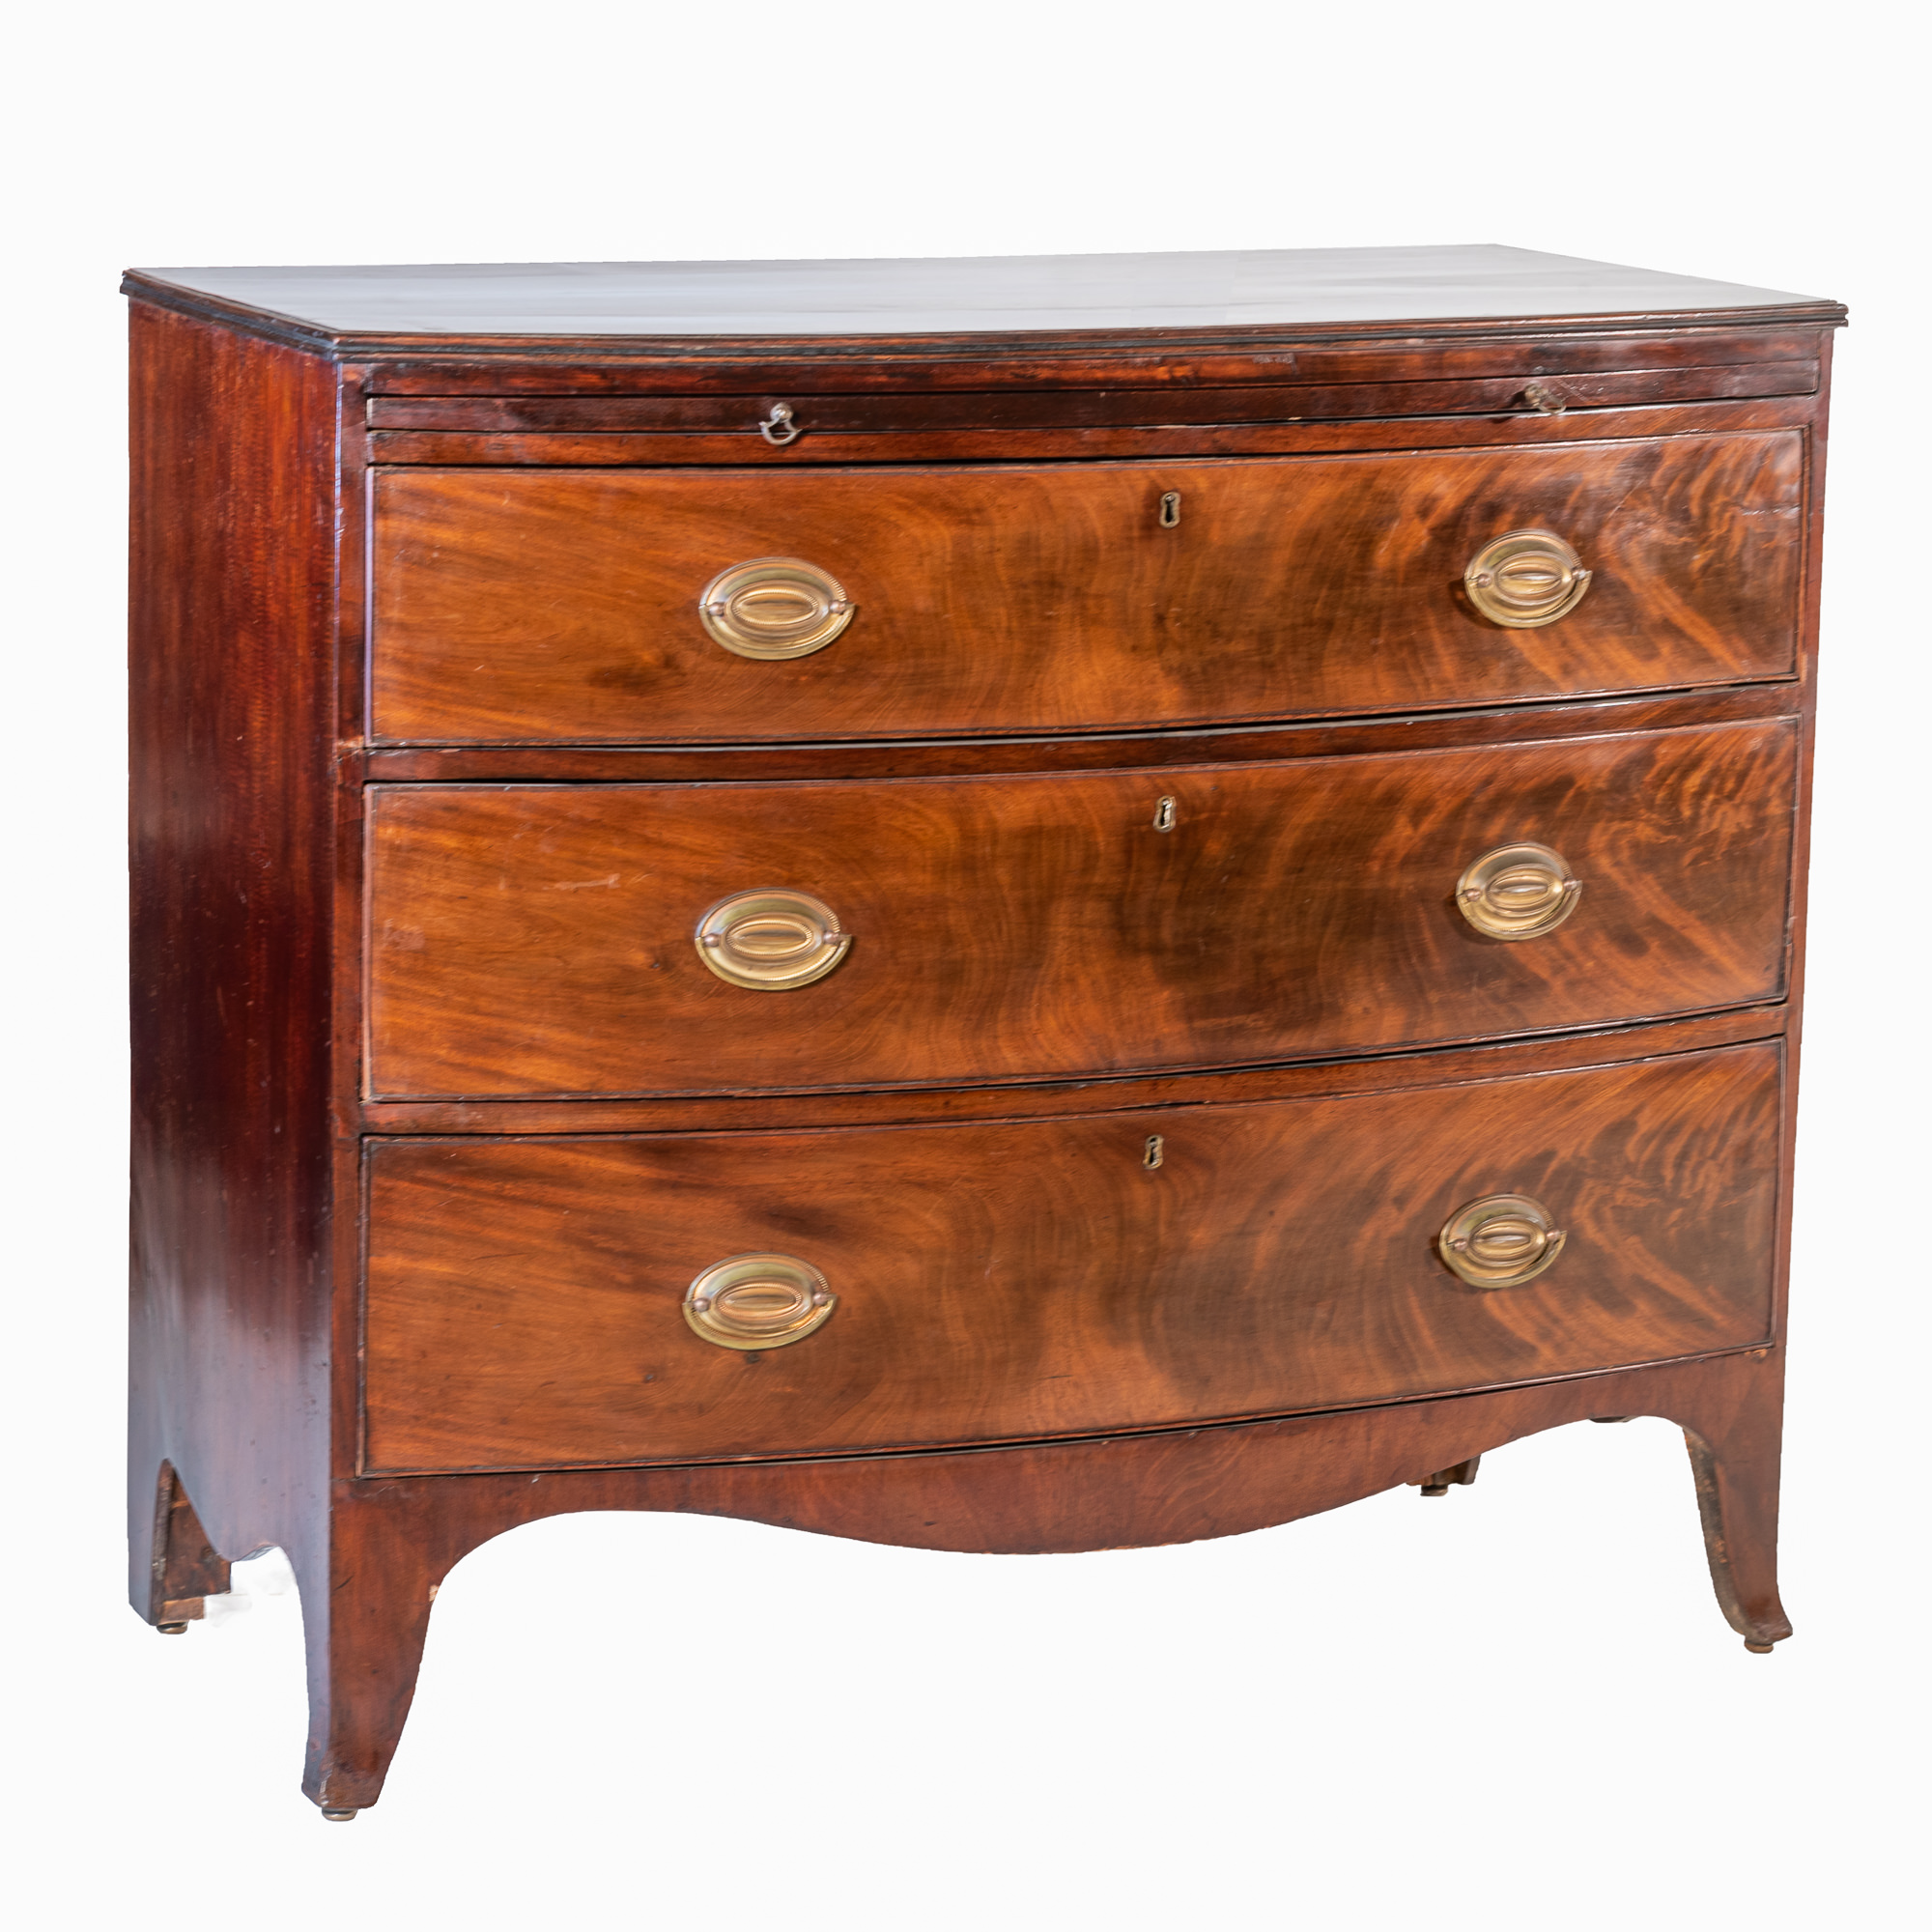 'George III Bowfront Mahogany Bachelors Chest of Drawers with Brushing Slide Circa 1800'